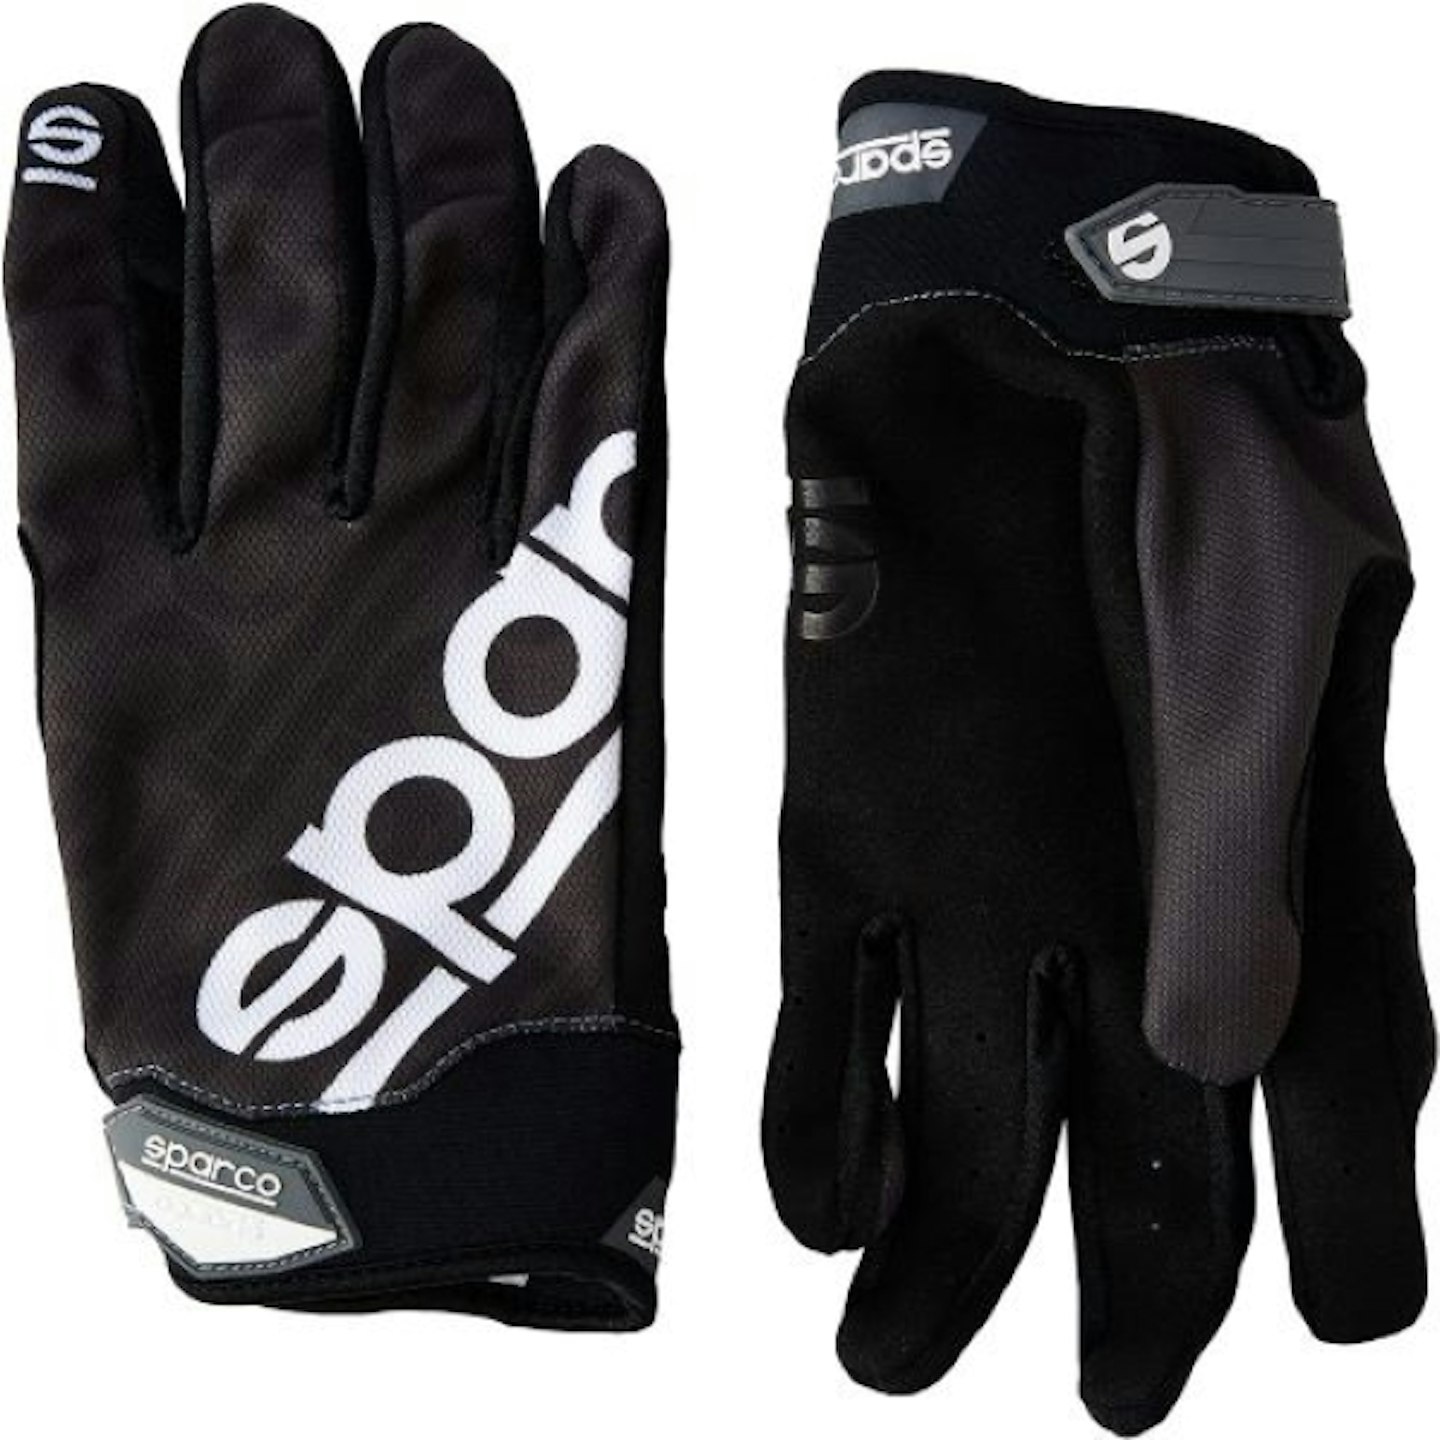 Sparco Meca 3 lightweight driving gloves for track days